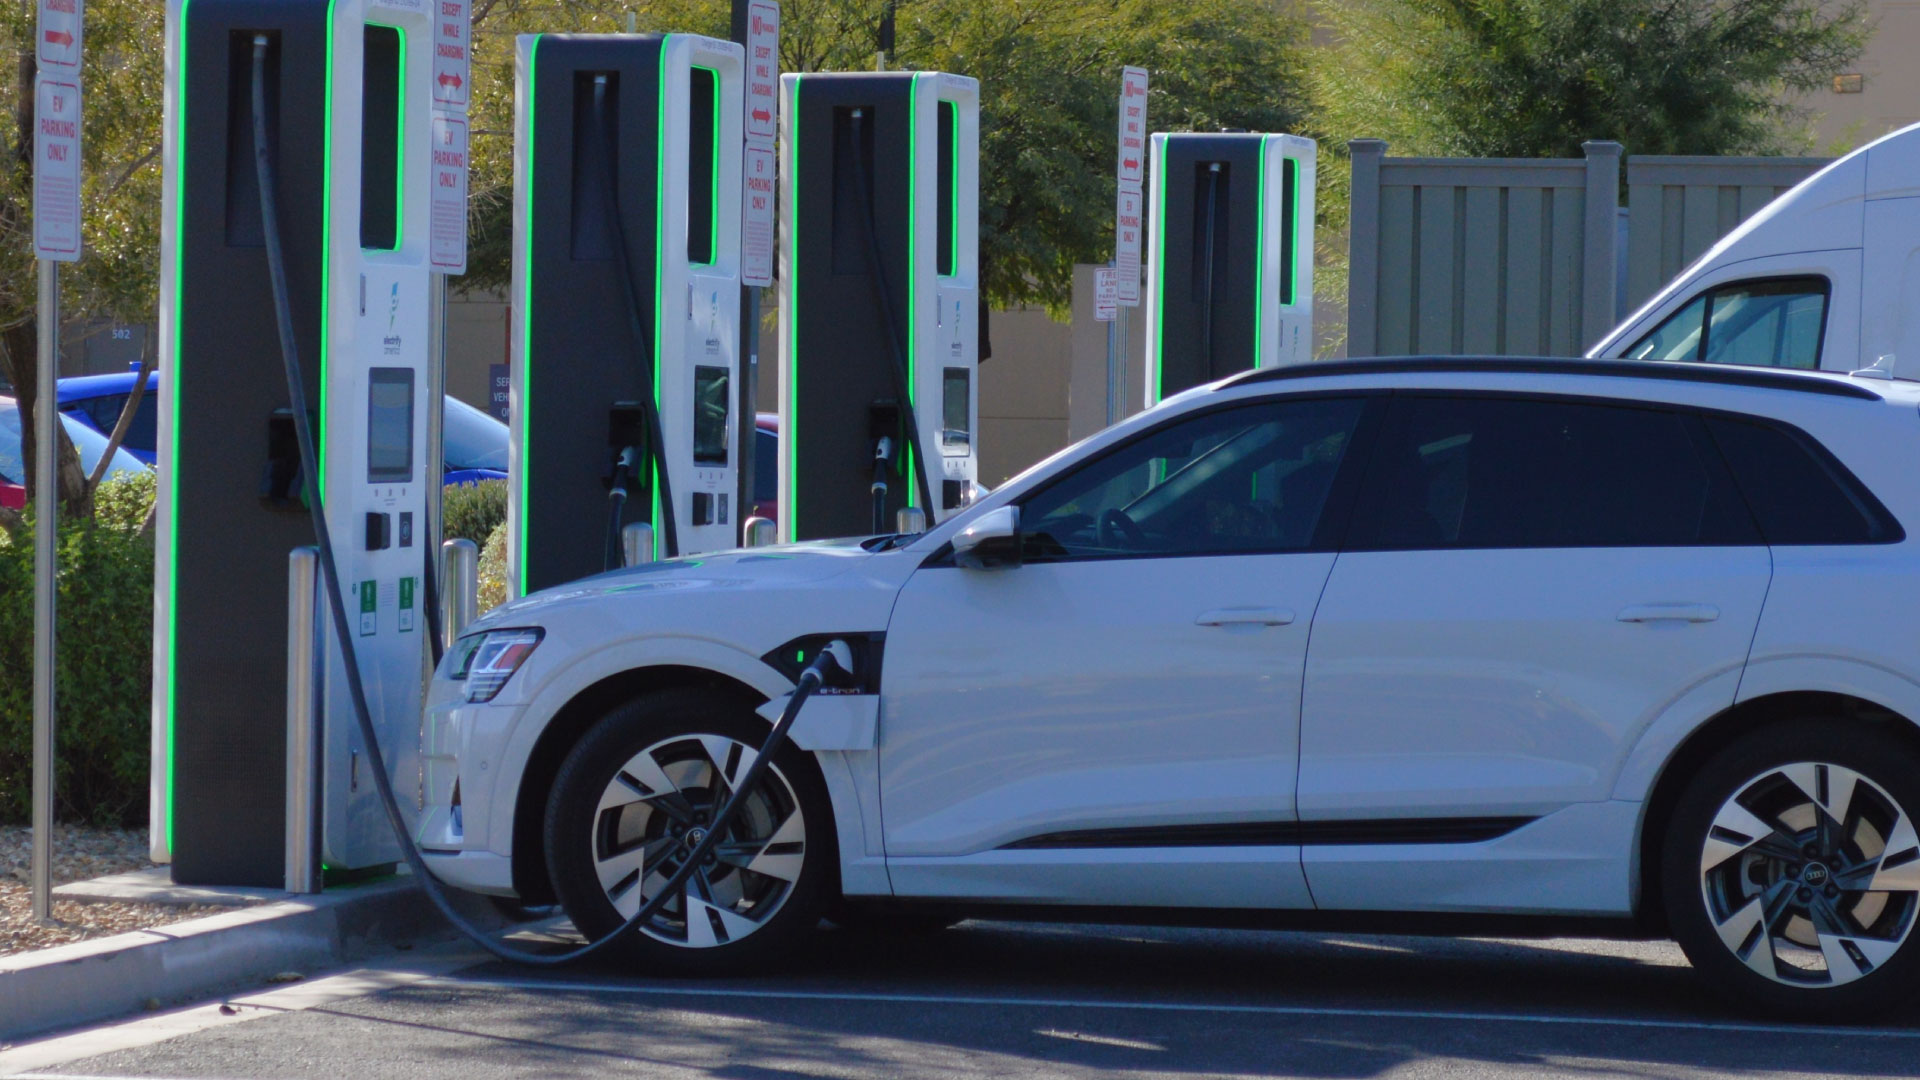 An EV car plugged in and charging at a charging station.